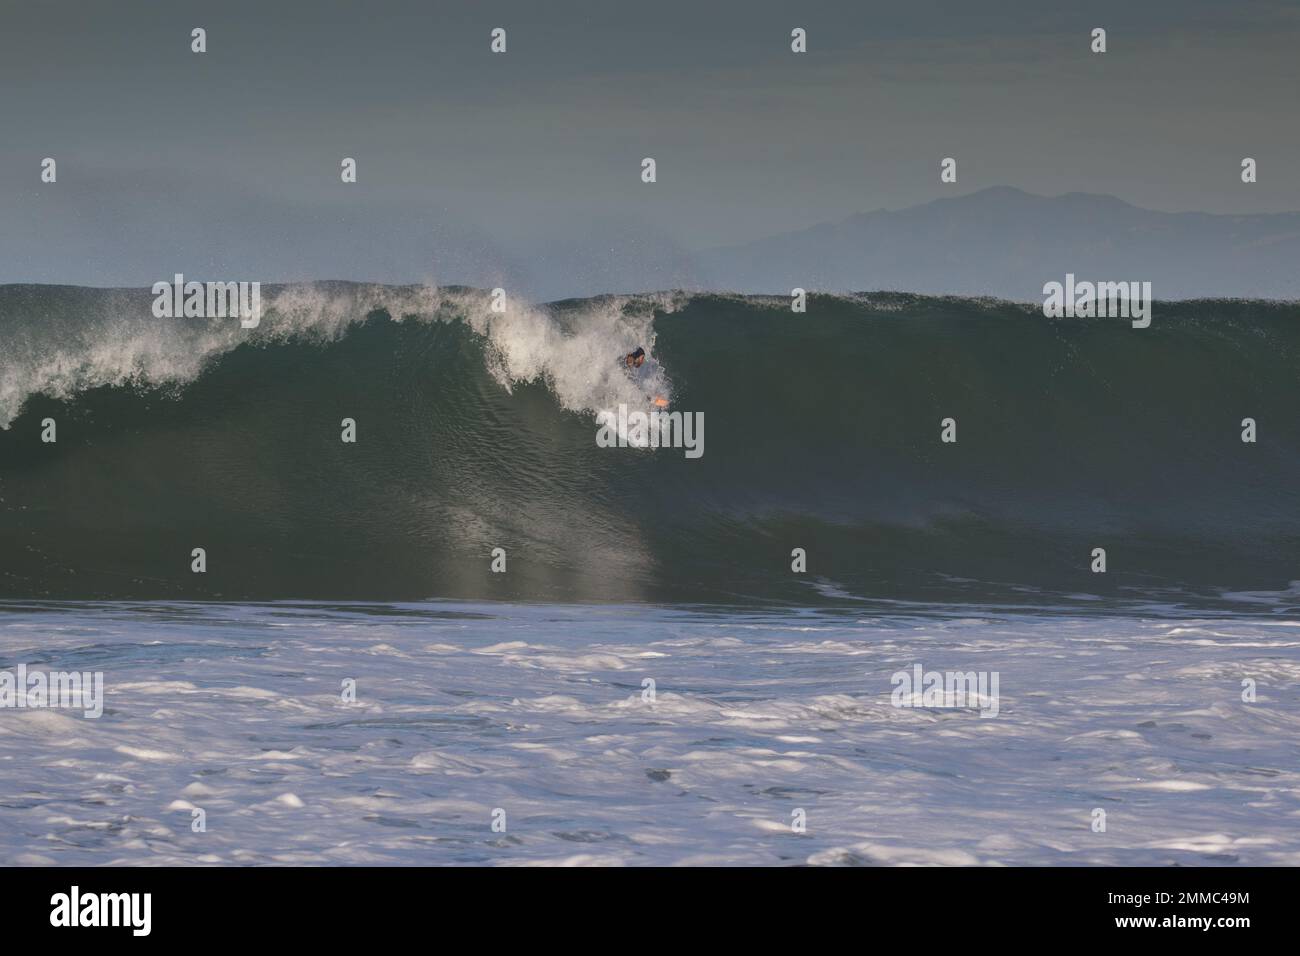 Bodysurfing waves at the South Jetty body surfing competition 2022 in Ventura, California , USA Stock Photo